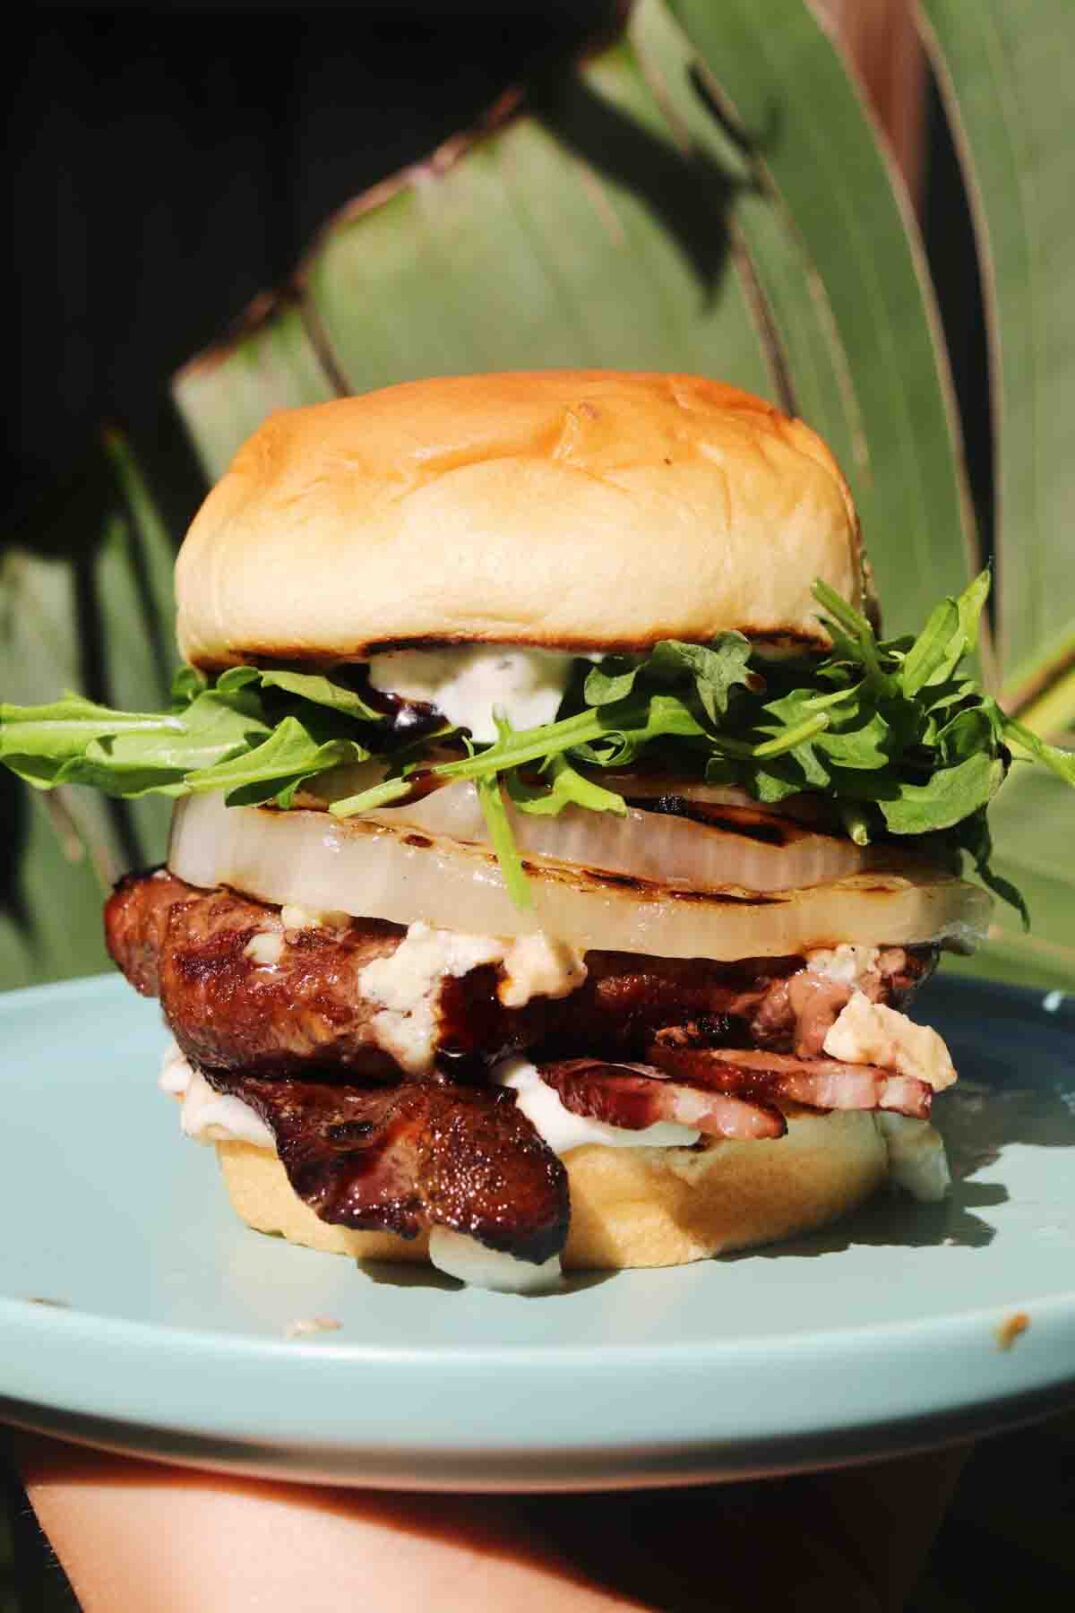 a beatufiul burger on a blue plate in front of a palm tree.